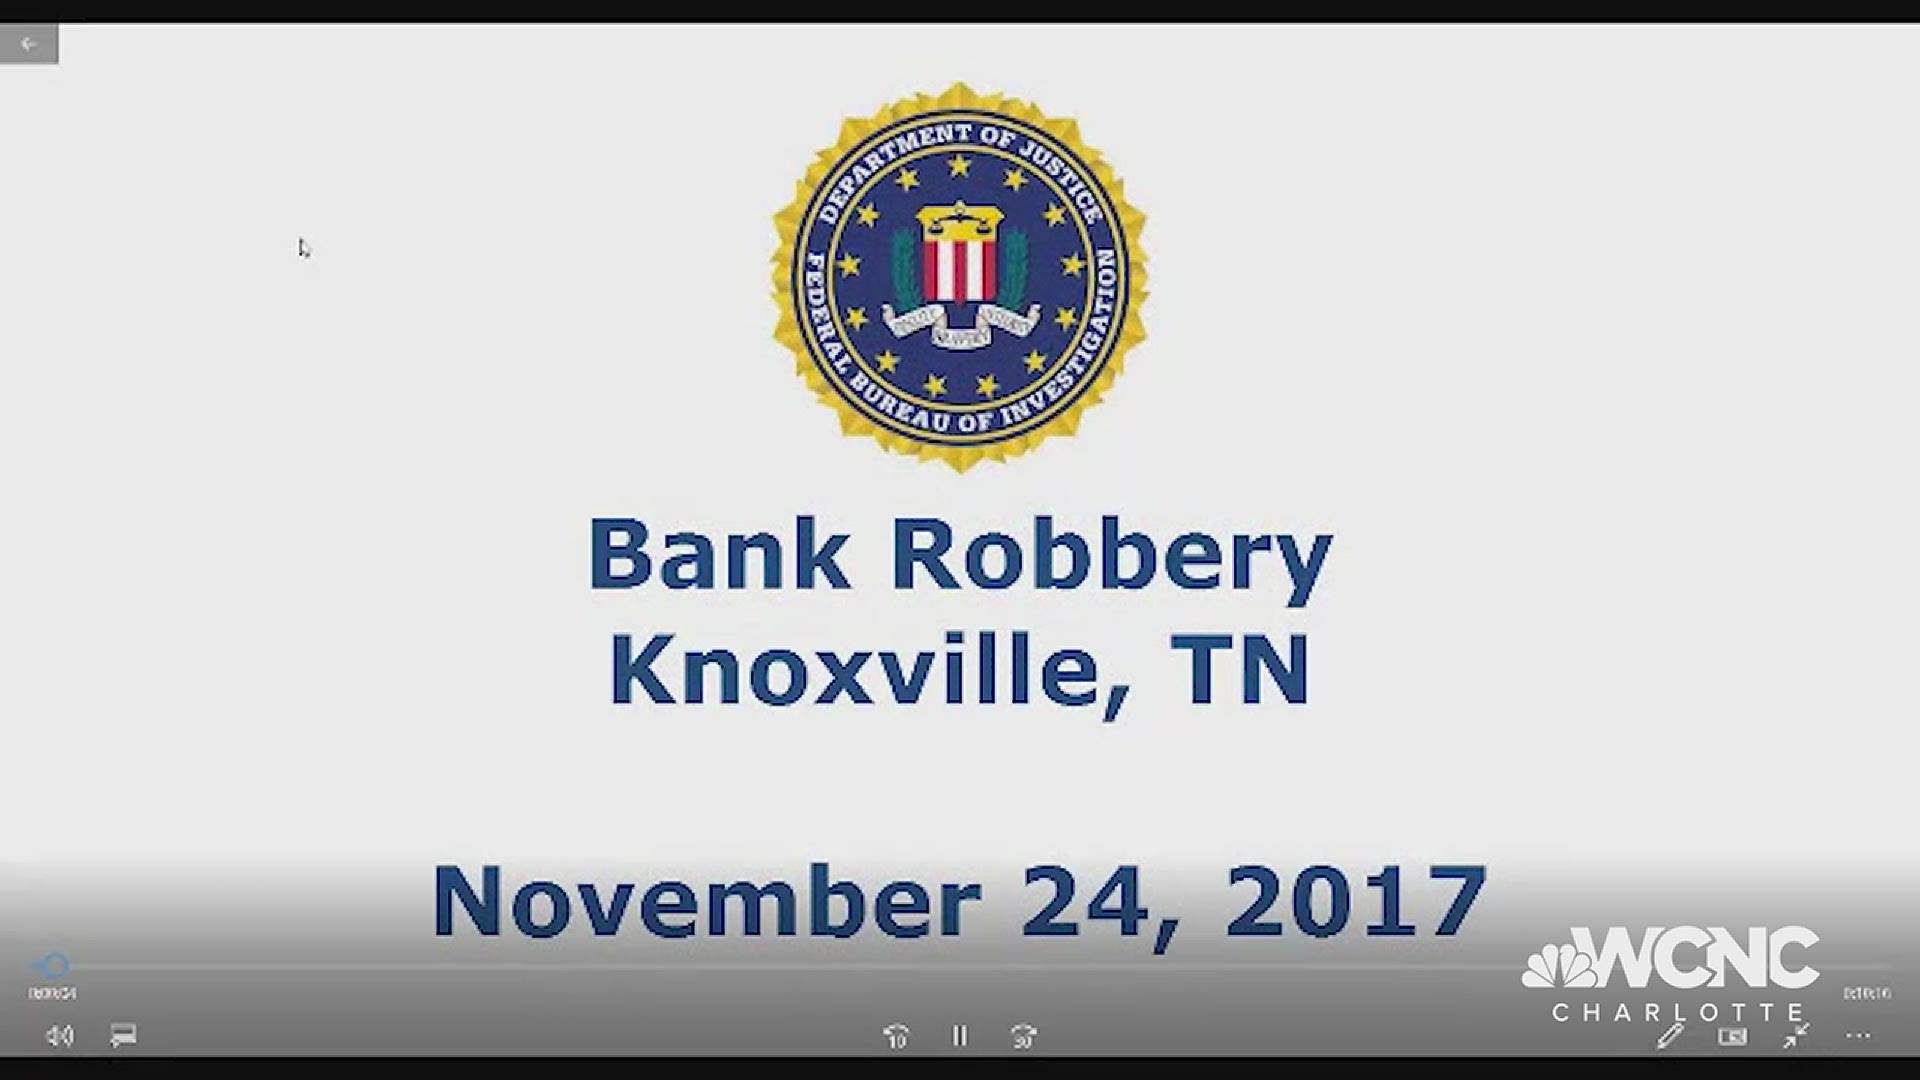 Authorities say the same man is responsible for 16 bank robberies in N.C., S.C. and TN over the past ten years.